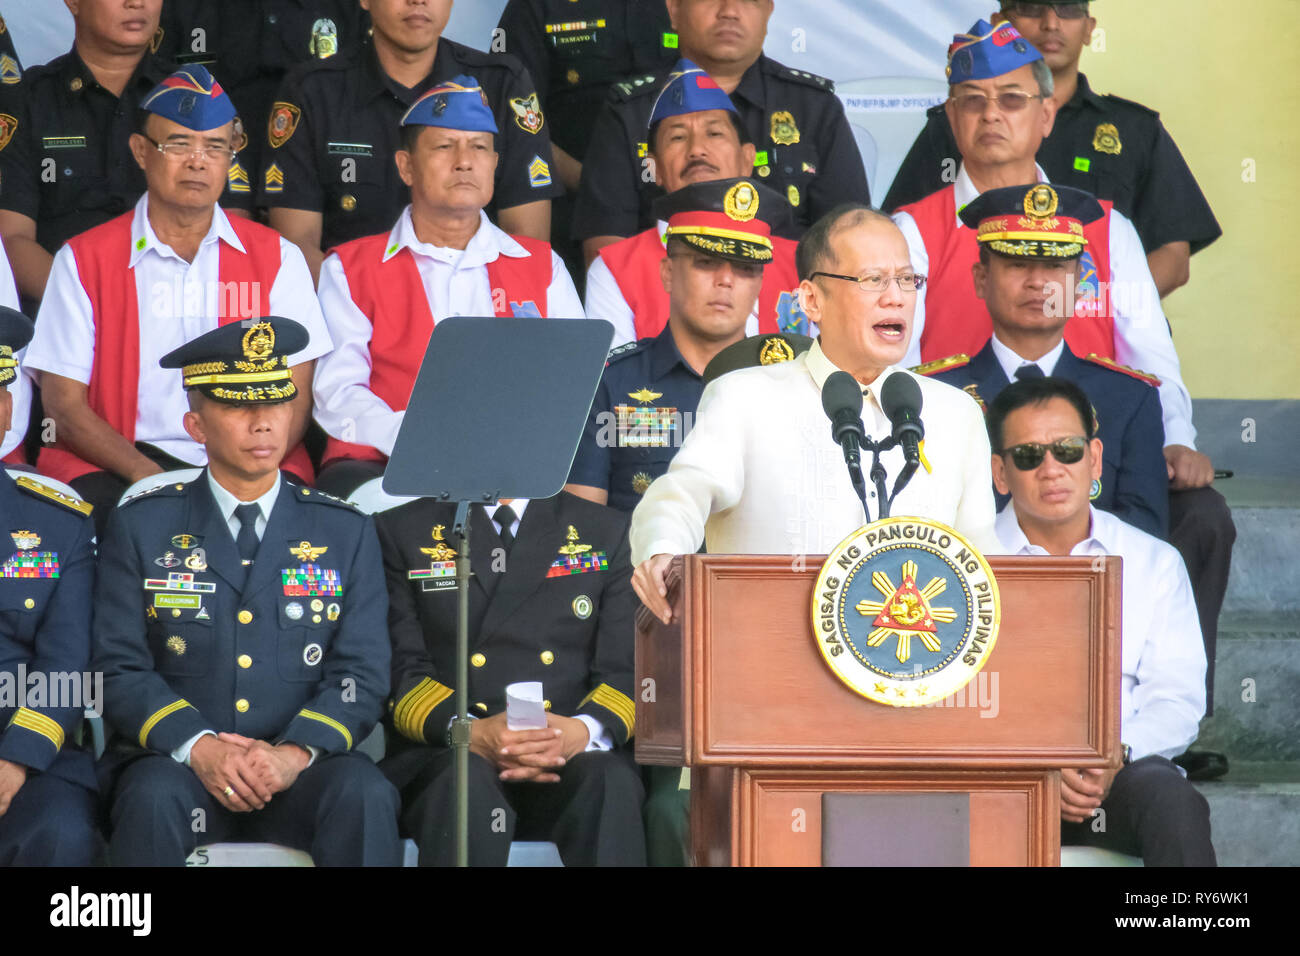 Benigno Aquino III, the 15th President of the Philippines, speaking in front of military men at 74th Bataan Day Anniversary - Mount Samat, Philippines Stock Photo